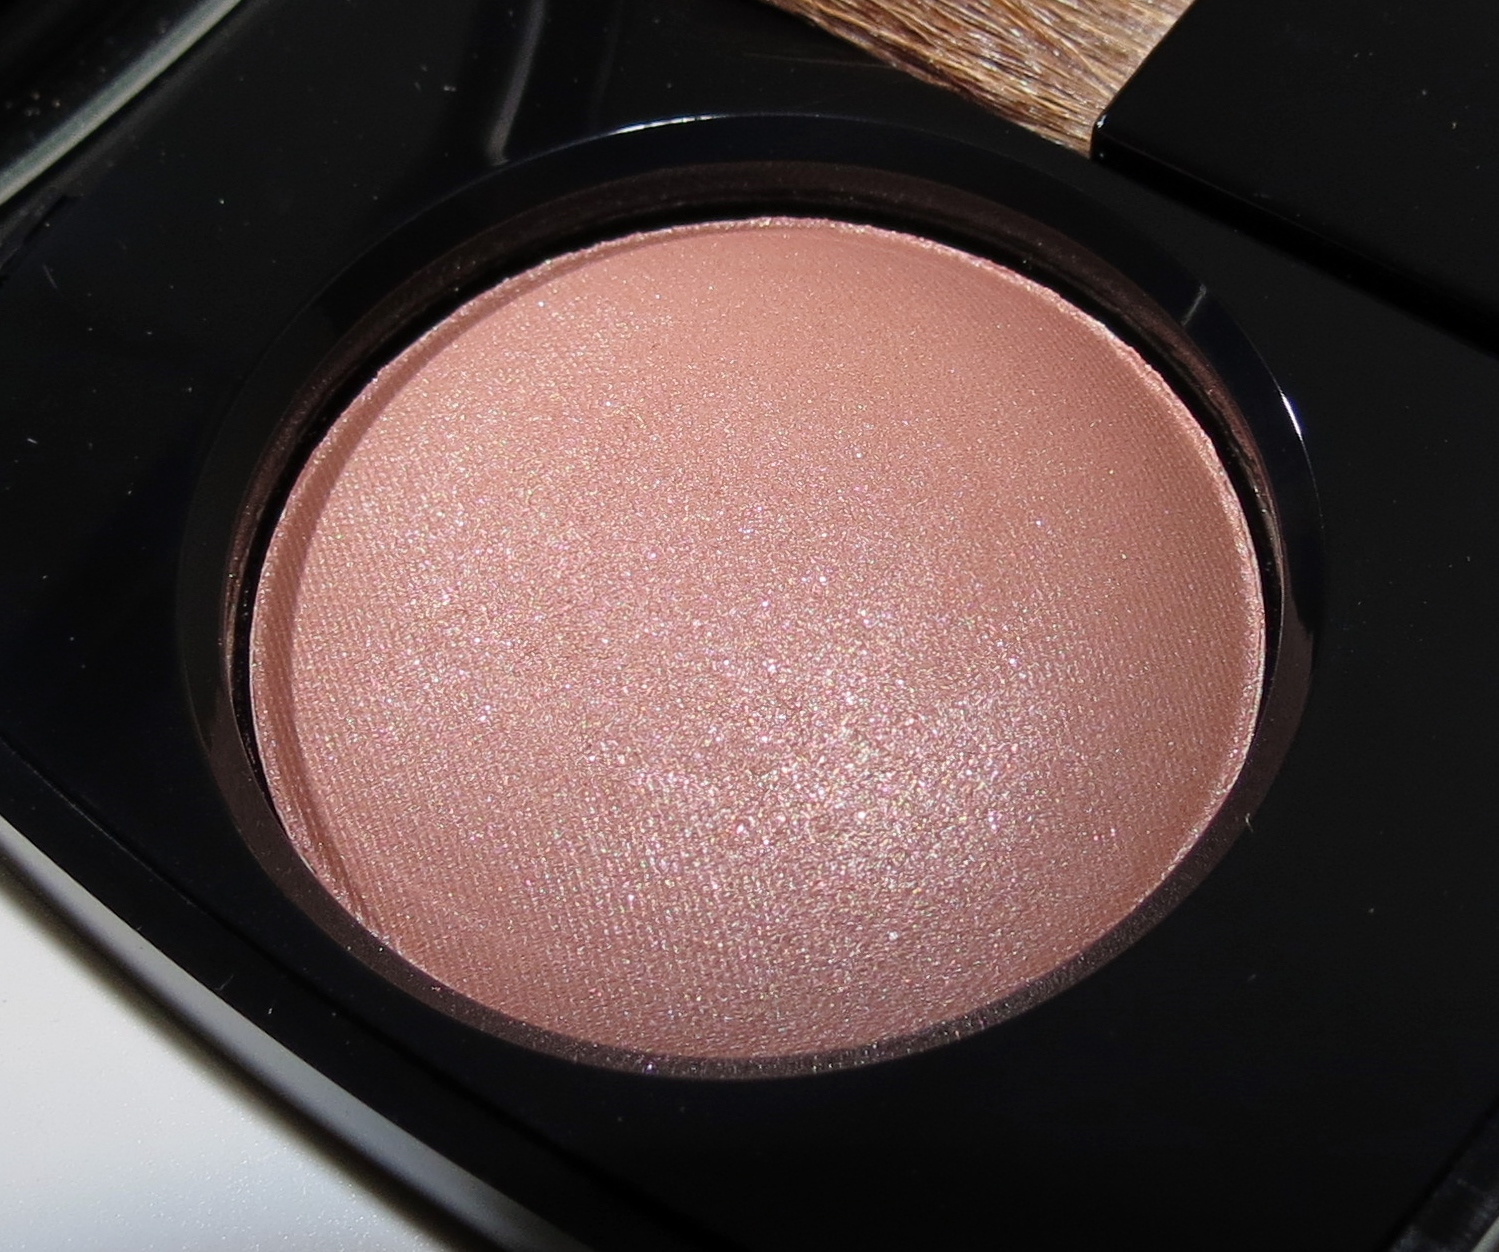 Chanel 84 ACCENT Joues Contraste Powder Blush Swatches, Review  FOTD -  Nuit Infinie de Chanel Holiday 2013 - Blushing Noir